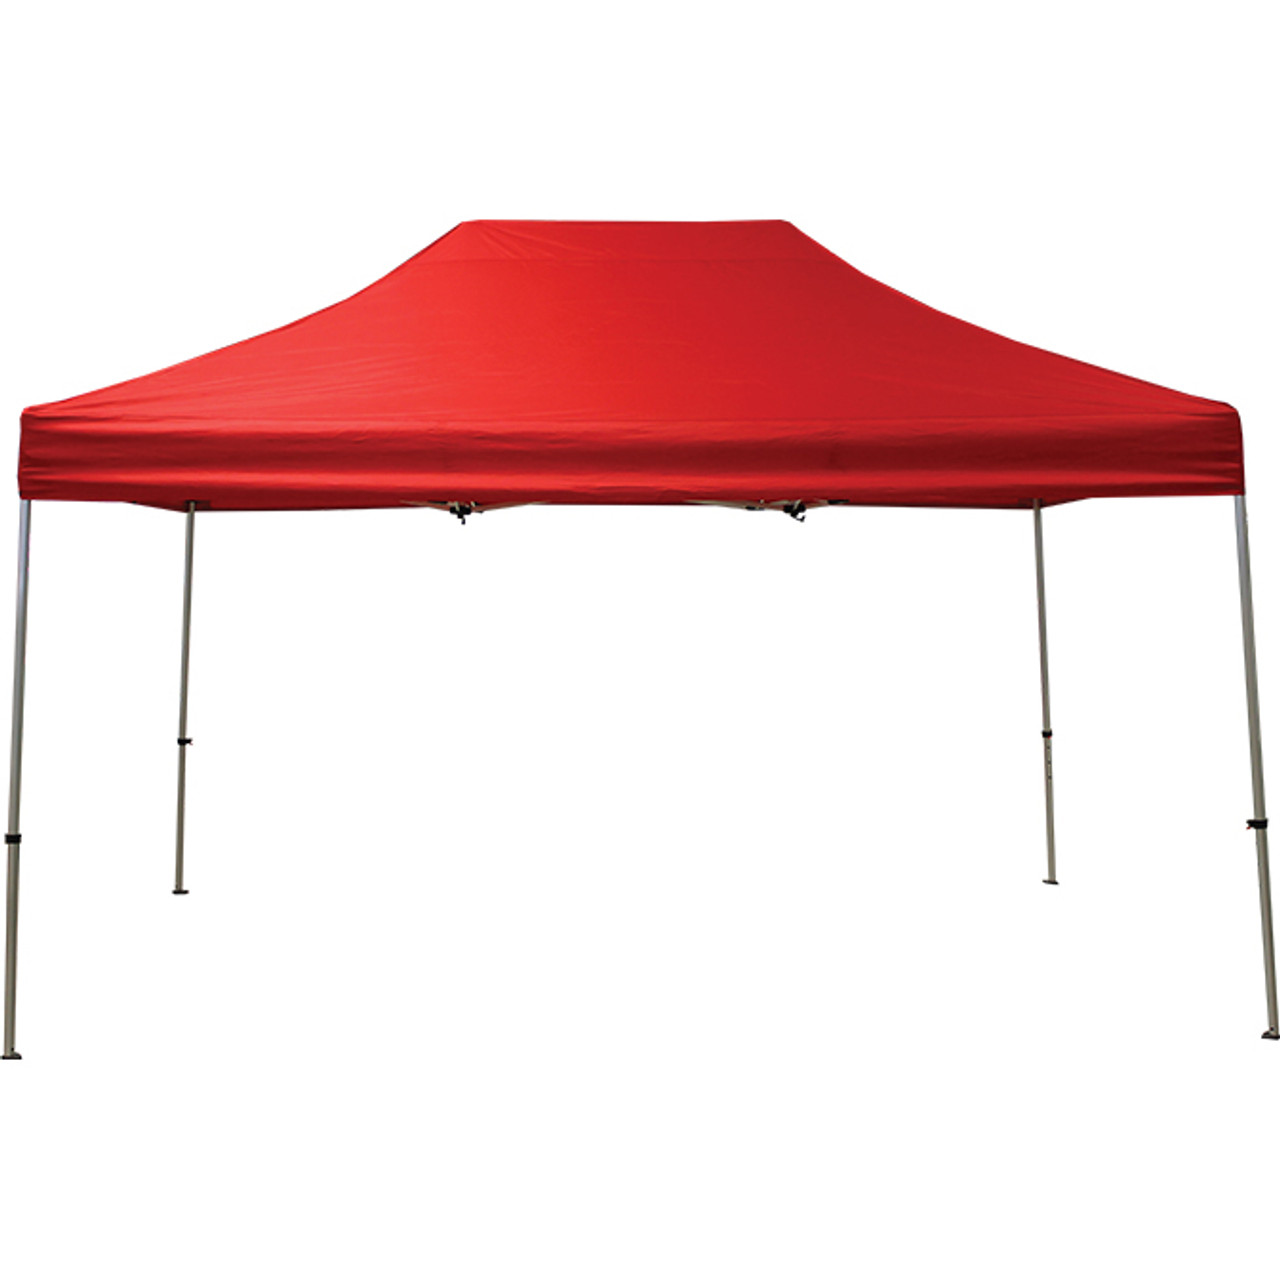 10' x 15' Fast Shade Instant Pop Up Canopy / Folding Tent, Complete